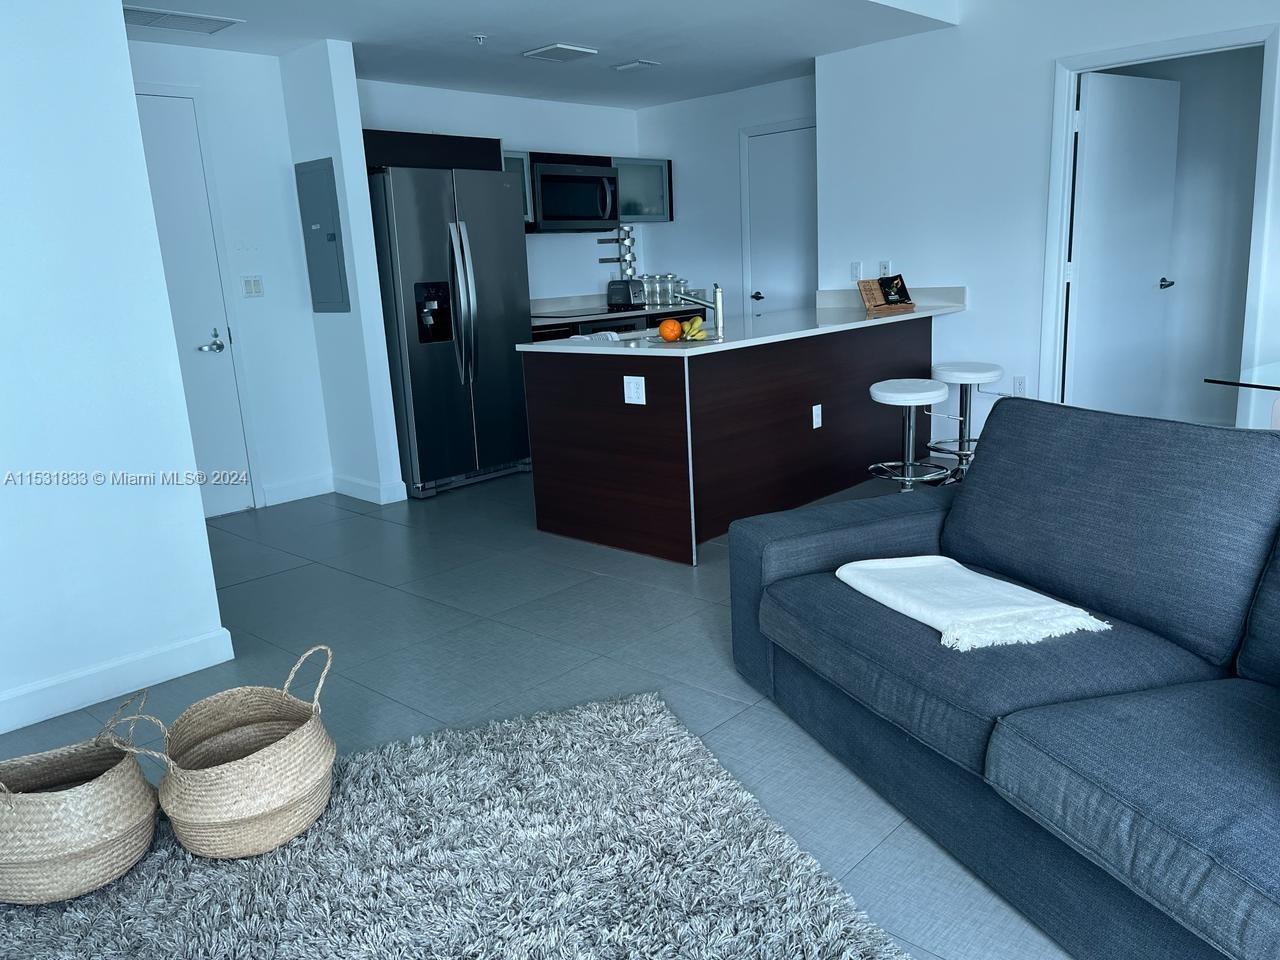 Beautiful Condo with open layout unit at Edgewater across from Margaret Pace Park and Biscayne Bay. Ready to move in. Great amenities, pool, two-floor gym, spa, business center, marketplace/cafe, and much more.